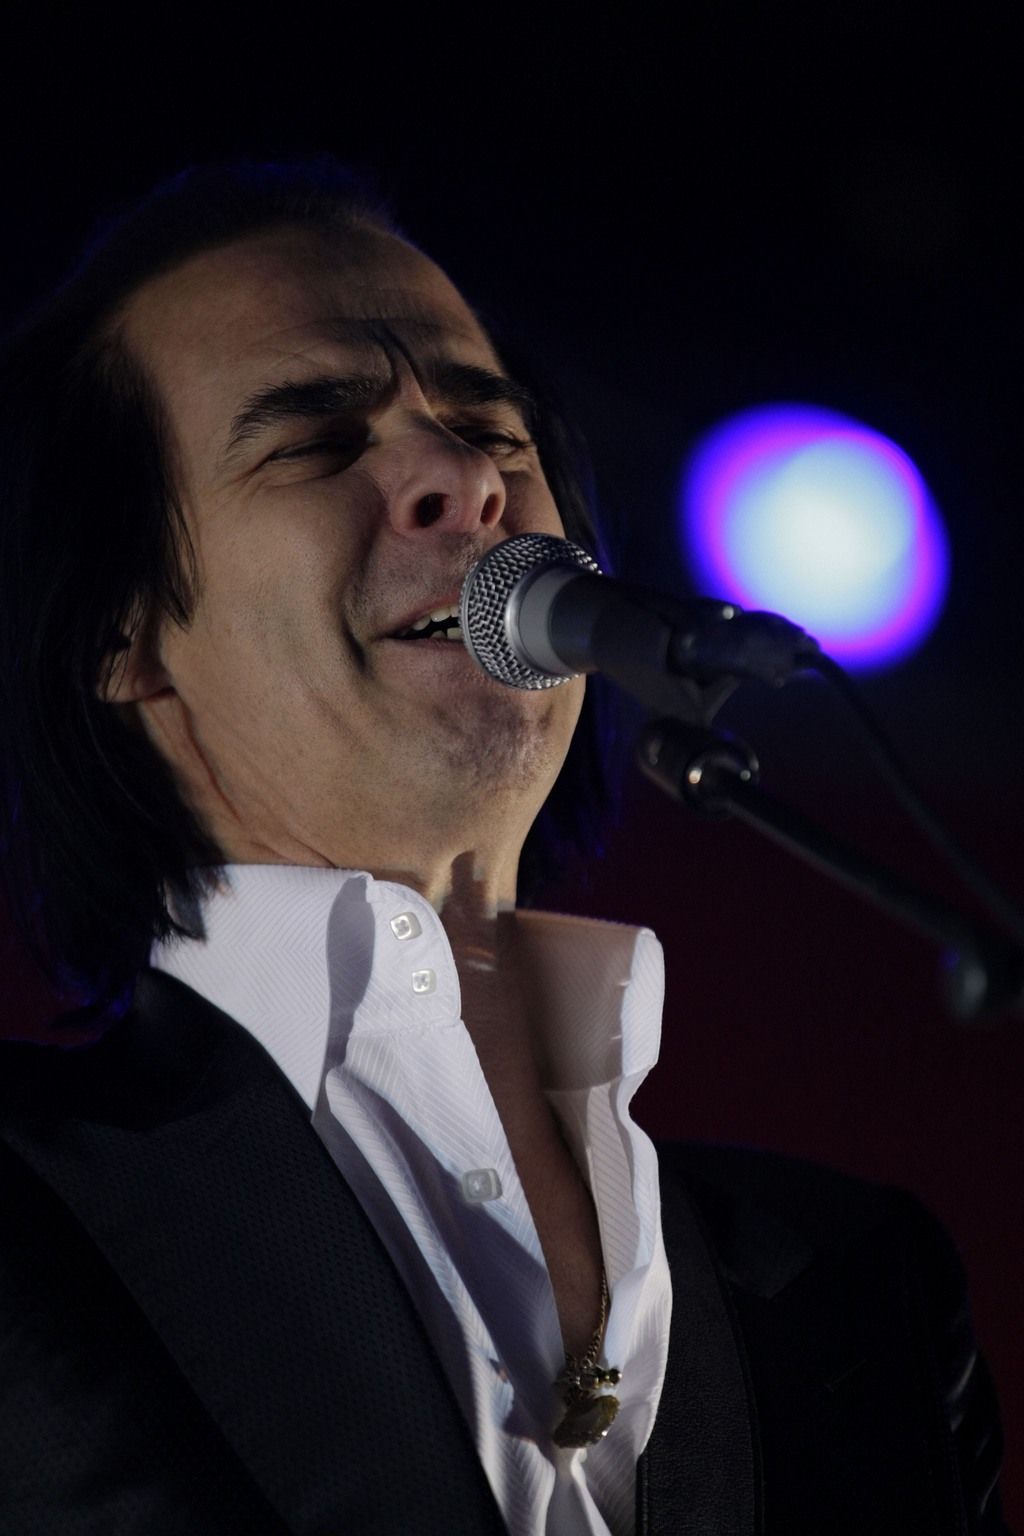 Nick Cave and Grinderman performing at annual 'Homebake' Australian music festival | Picture 134379